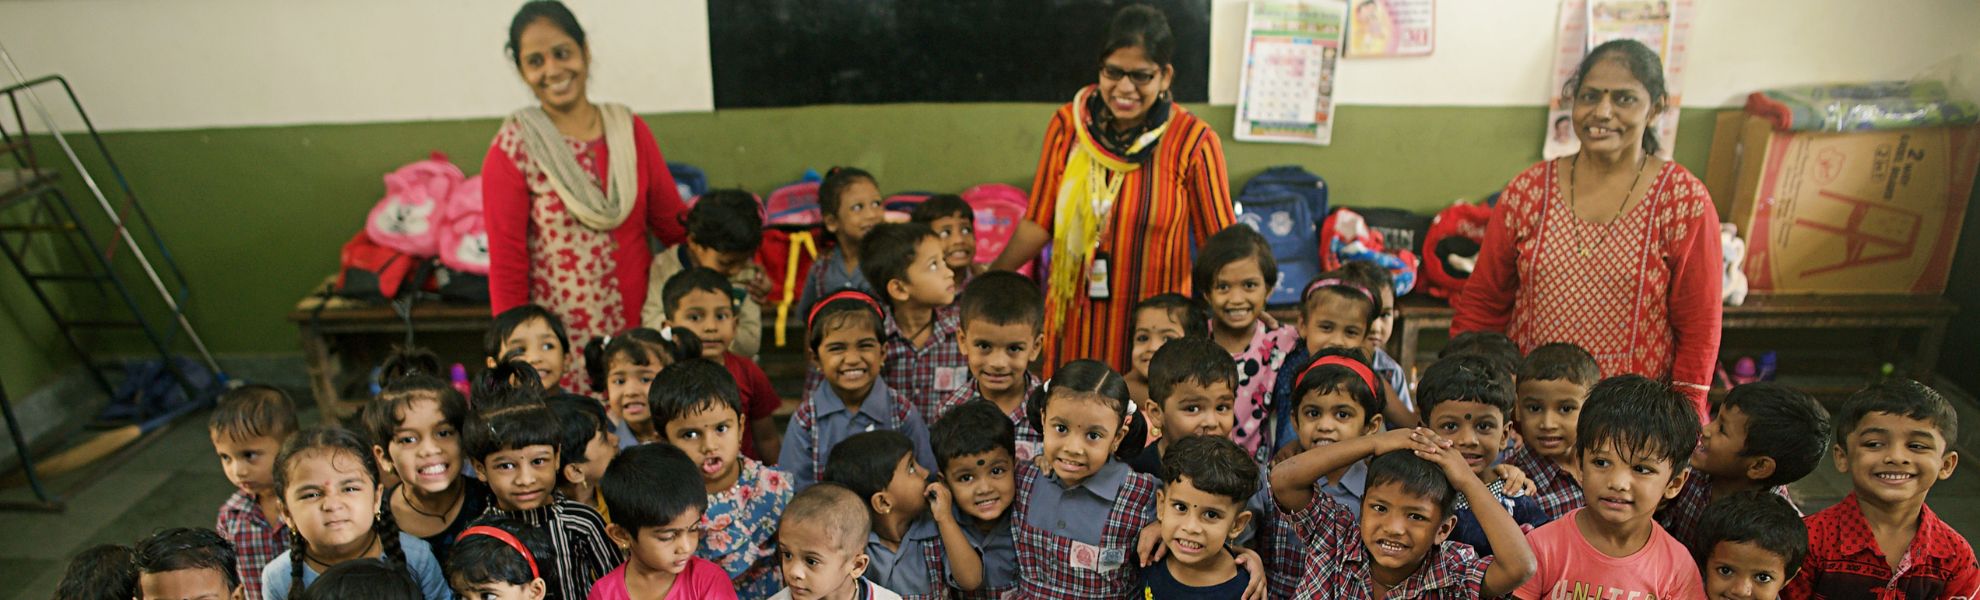 Early Childhood Care and Education (ECCE) in India - Ampersand Group